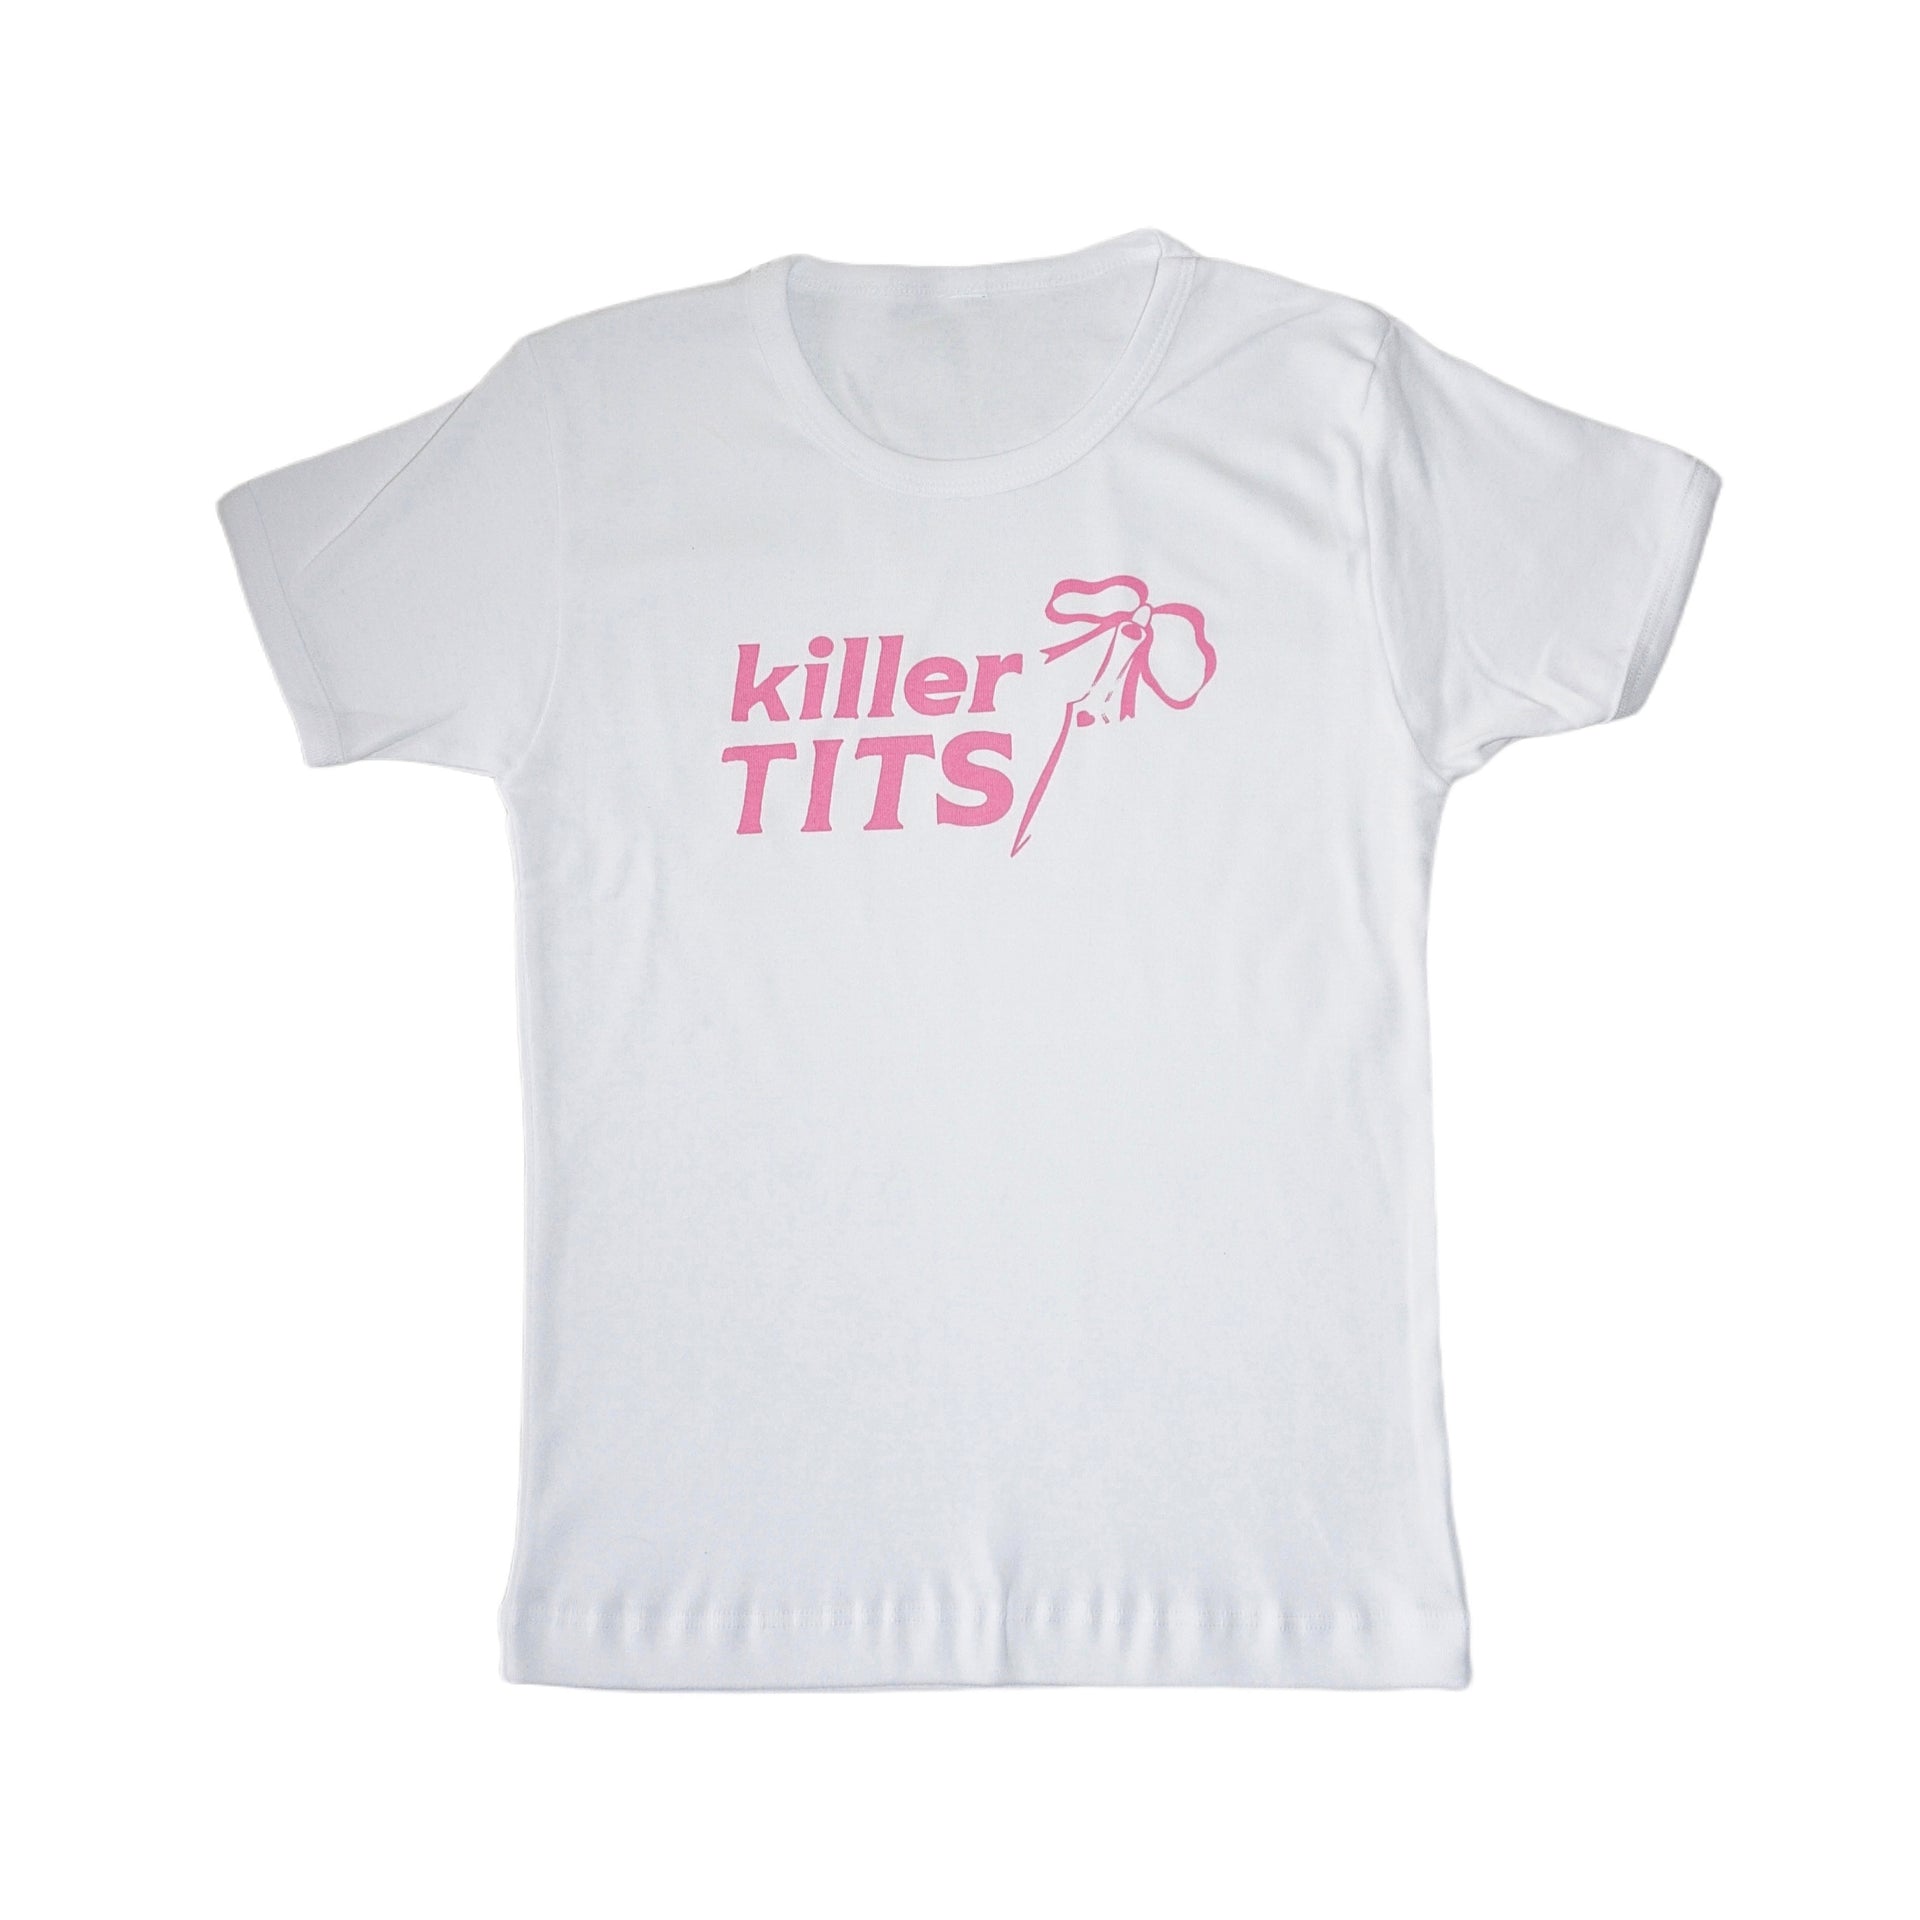 Killer Tits Fitted Baby Tee